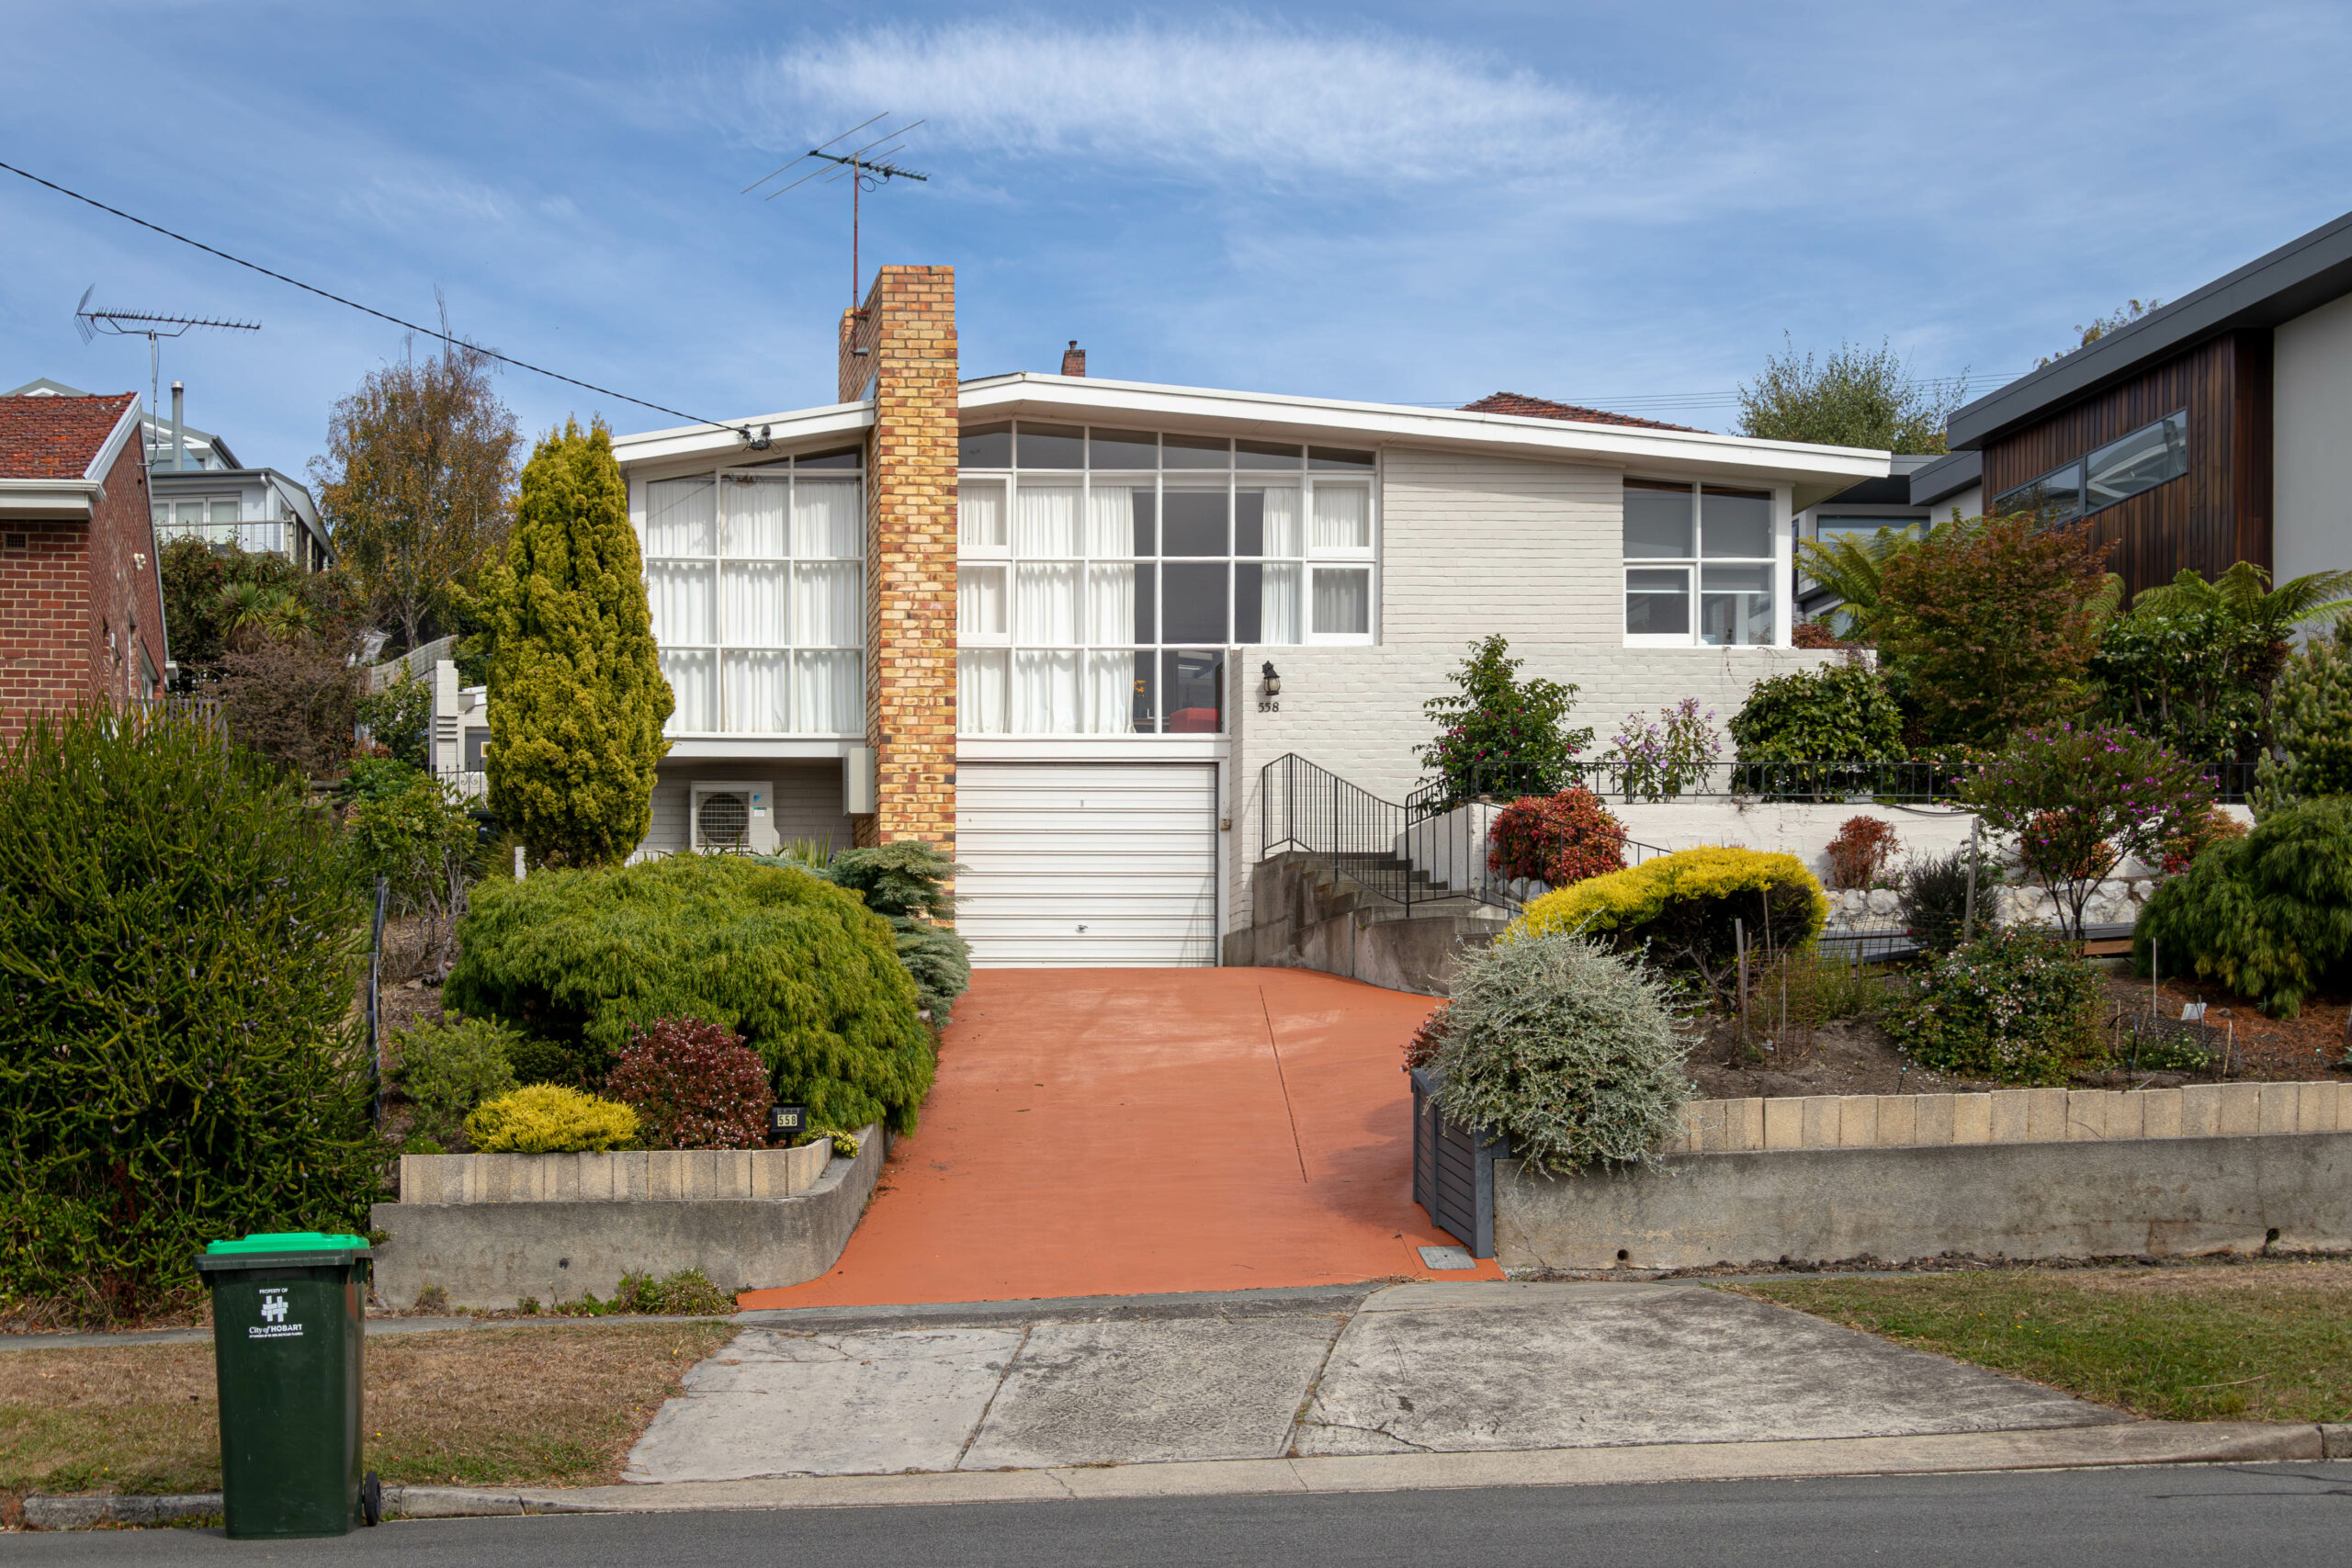 A mid-20th century brink house painted white, with a grid of small square windows on the front wall and an orange brick chimney. There is an orange driveway leading to a garage door